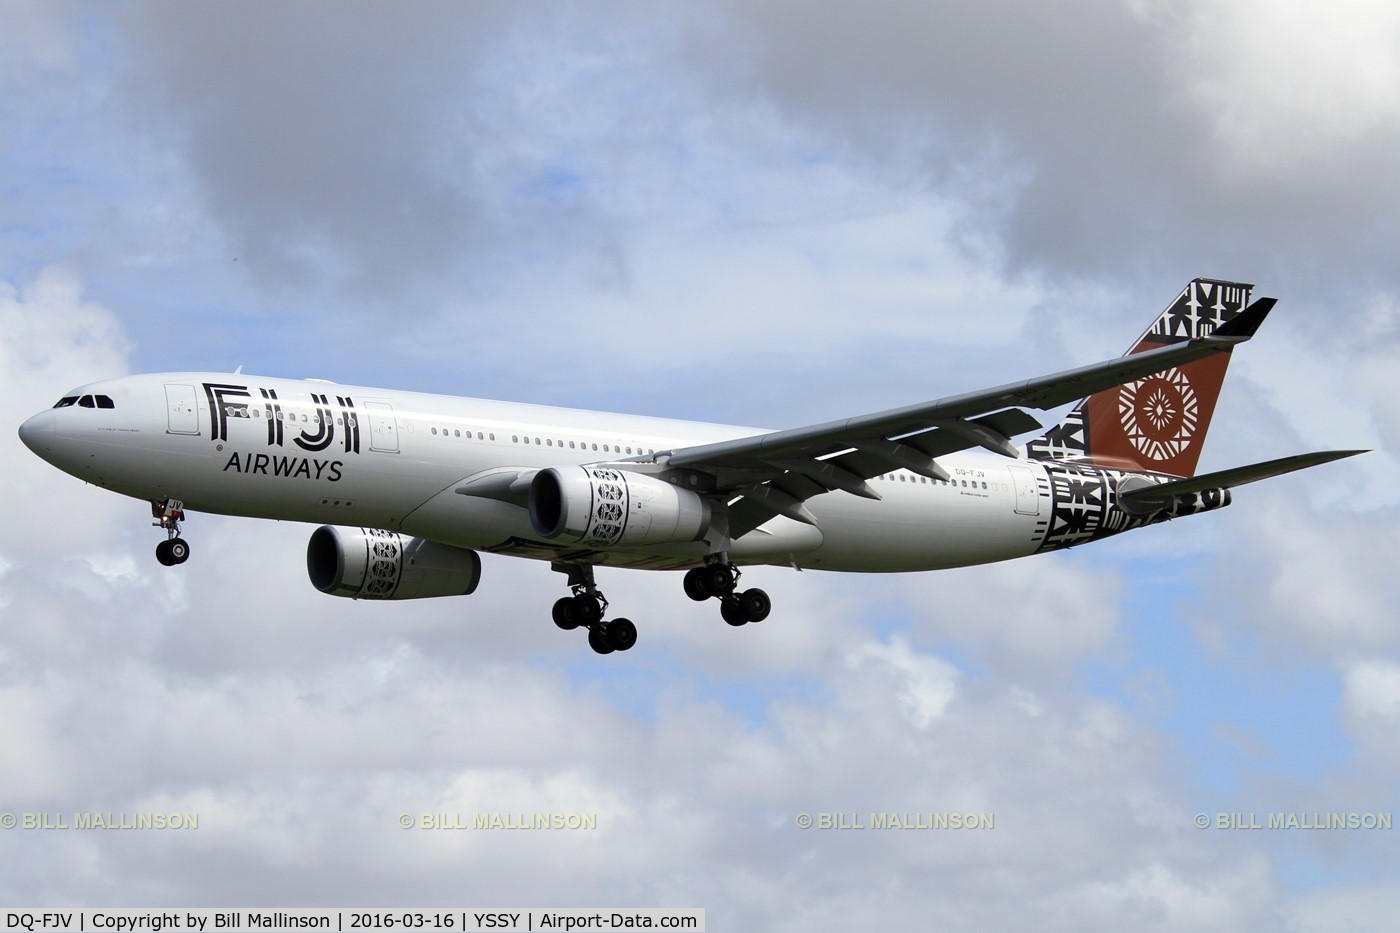 DQ-FJV, 2013 Airbus A330-243 C/N 1465, finals to 16R